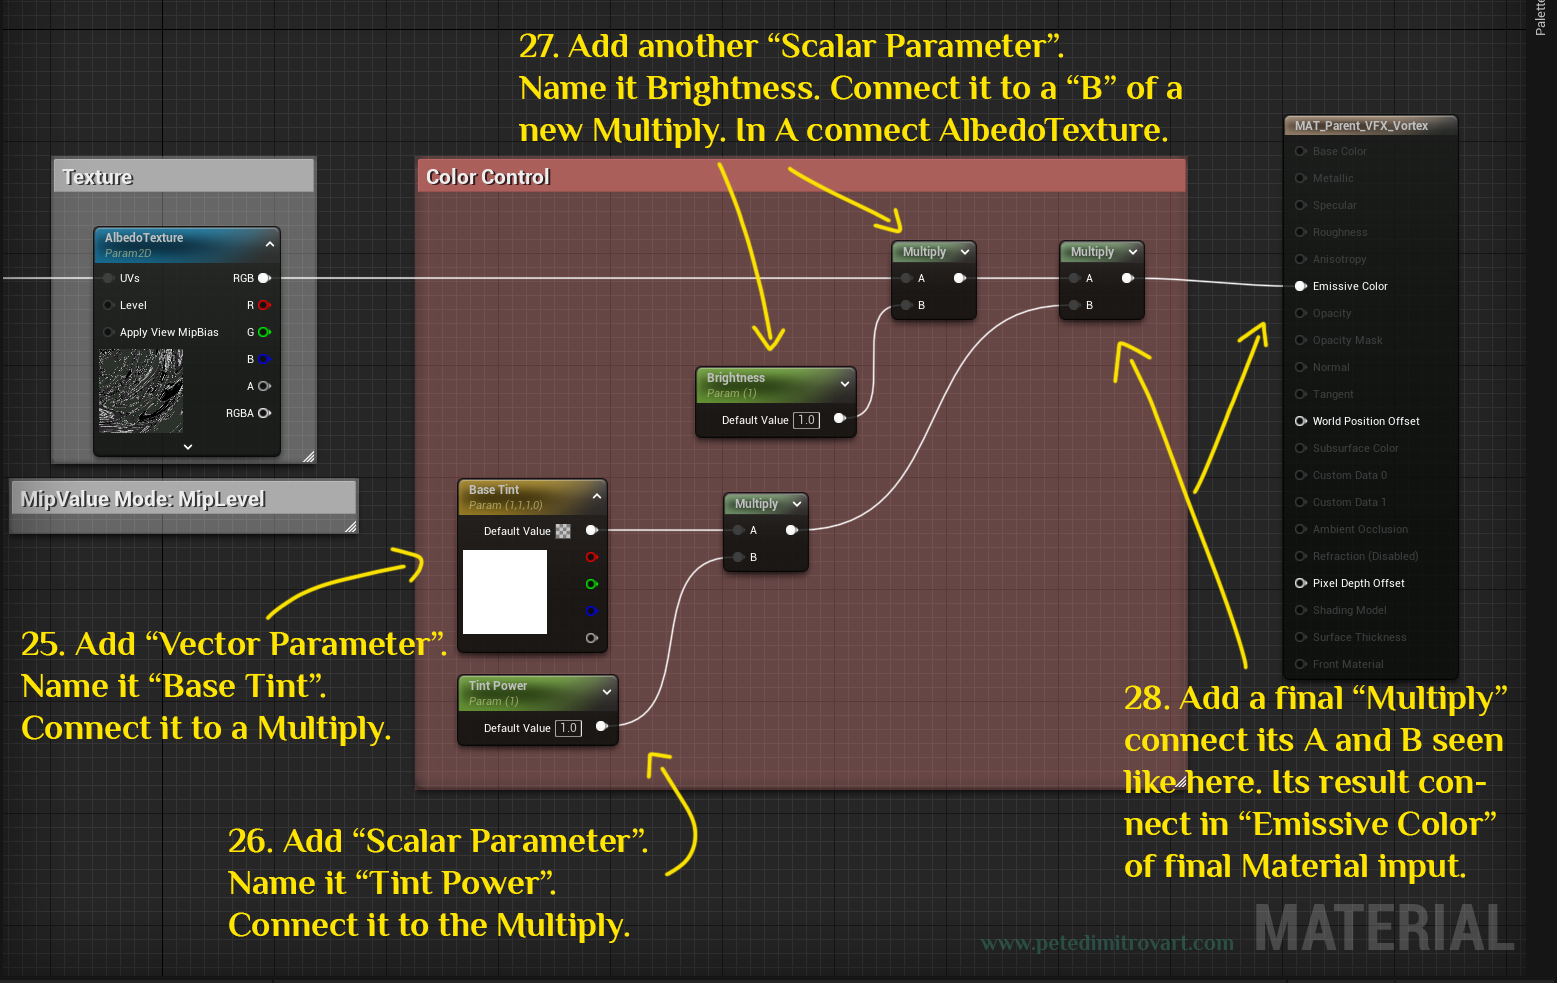 Screenshot that shows the nodes that come right after the “Texture” group shown in gray in the previous image. The arrows point to new Vector Parameter called “Base Tint” as well as few new scalar parameters called “Tint Power” and “Brightness” they are all connected through few multiplies. Text explaining is transcribed in paragraph above.